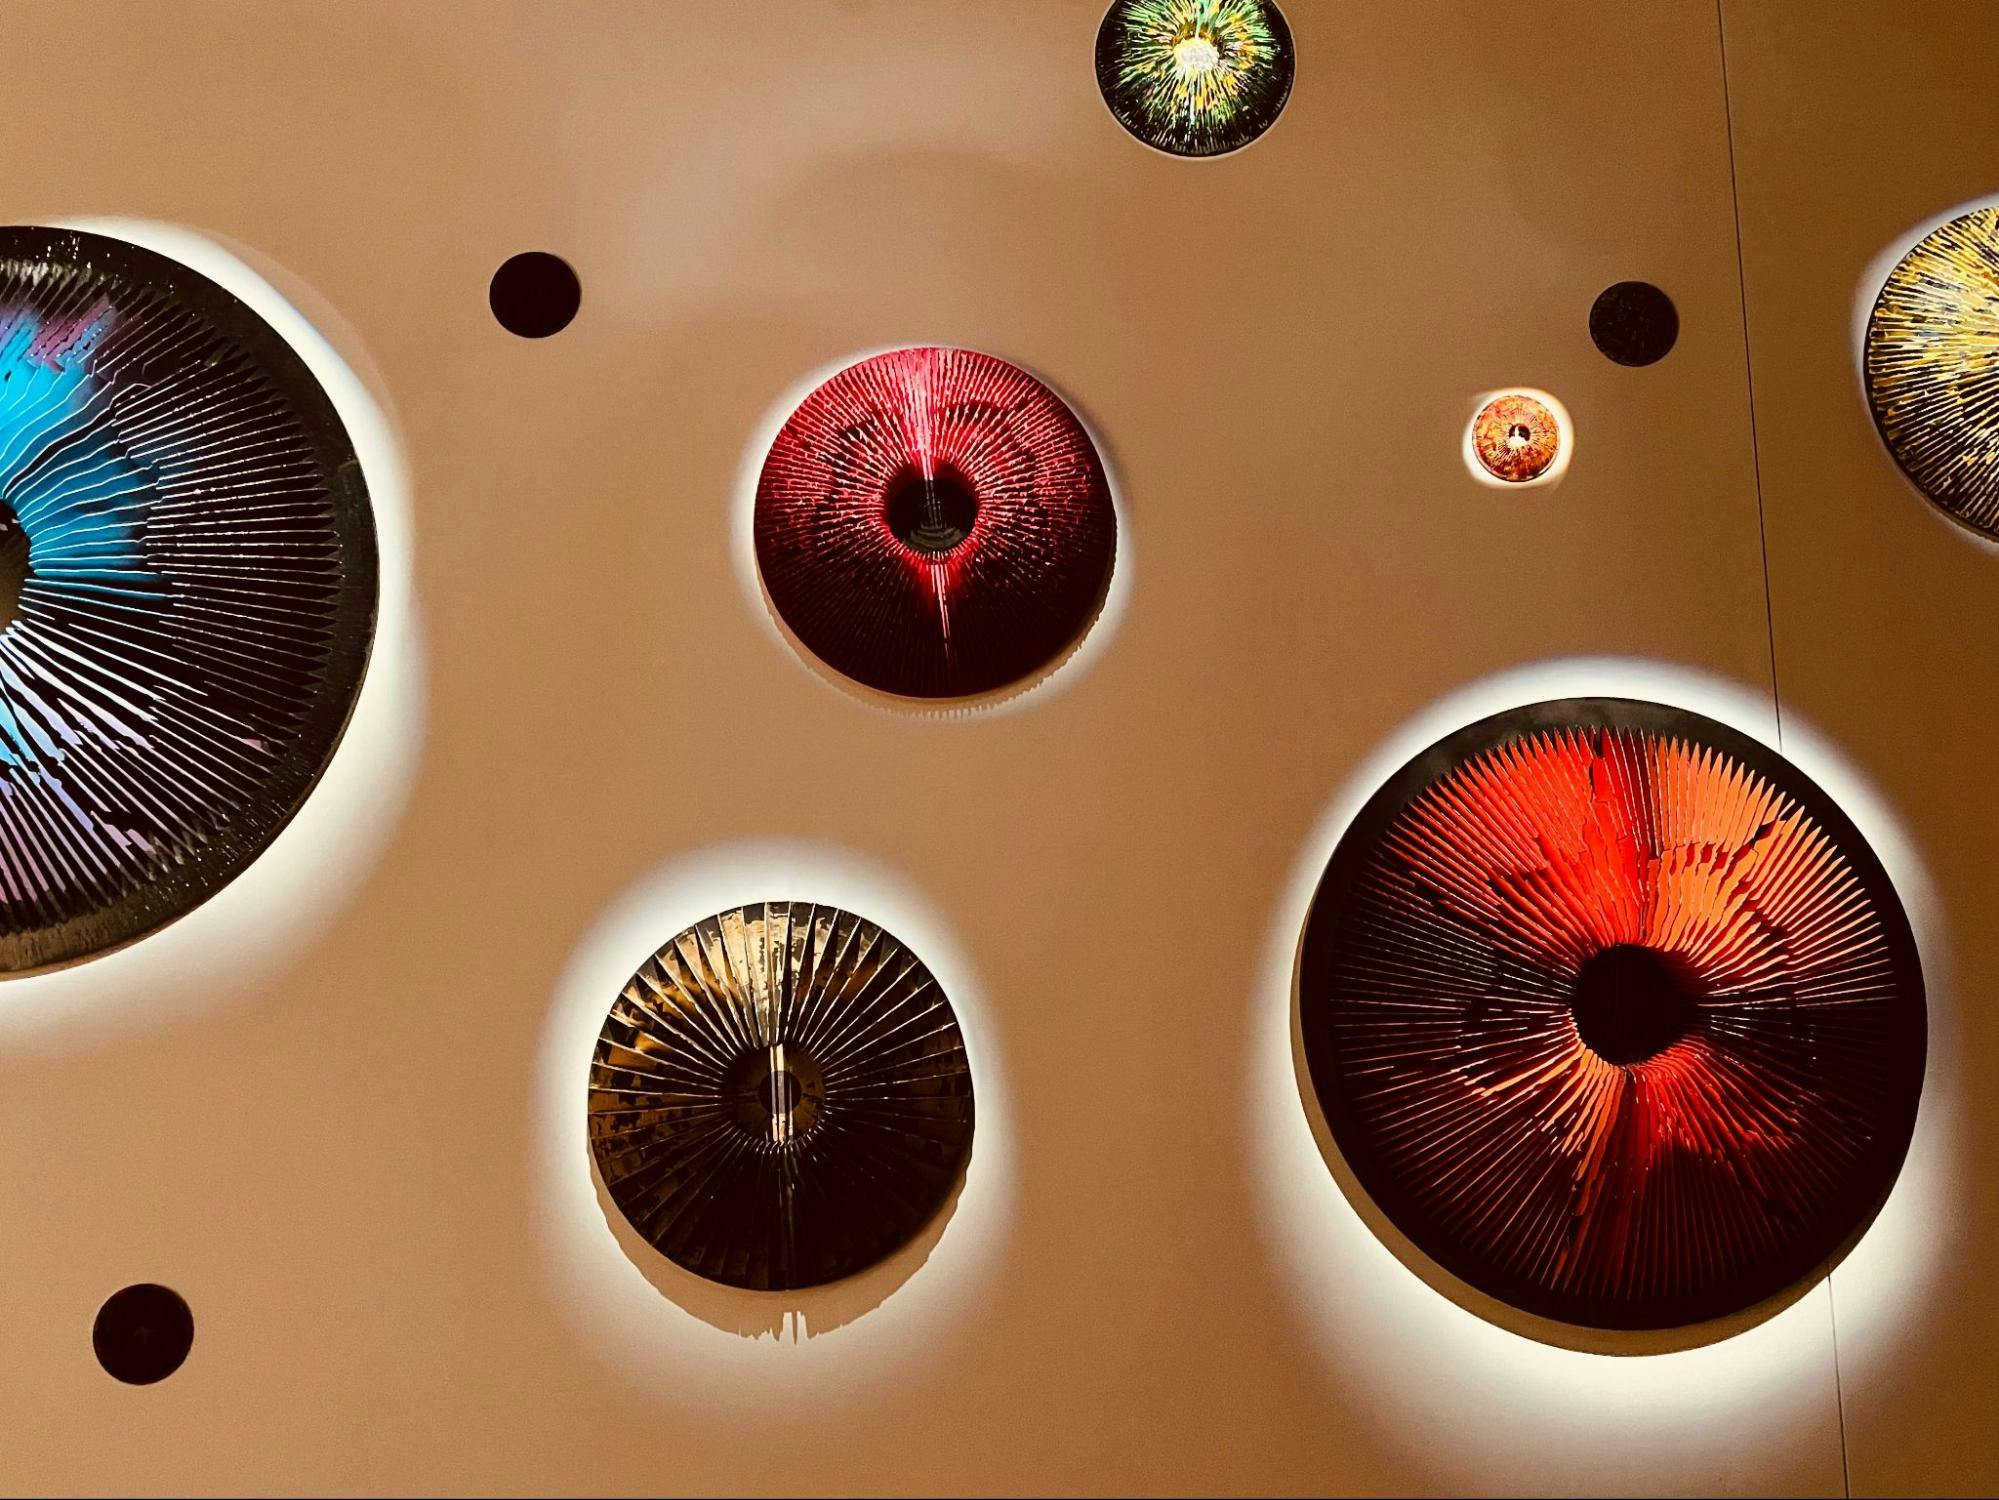 Picture shows a part of Vasily Klyukin’s ‘Mindspace’ installation: Multi-colored, structured, and portal-like spherical caps attached to a wall.